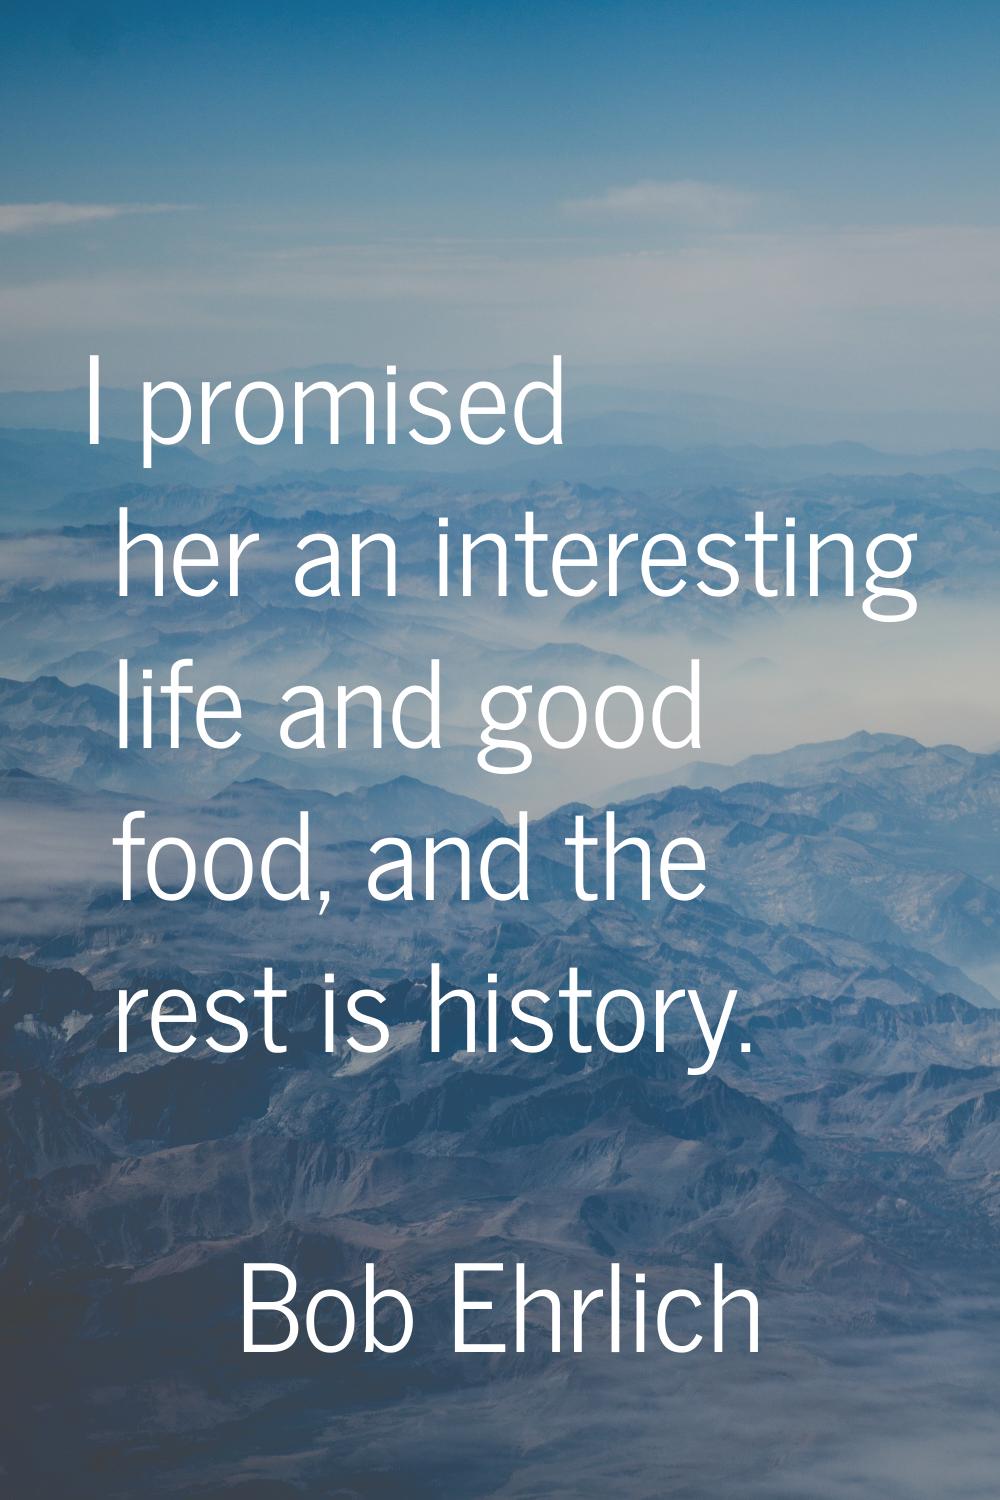 I promised her an interesting life and good food, and the rest is history.